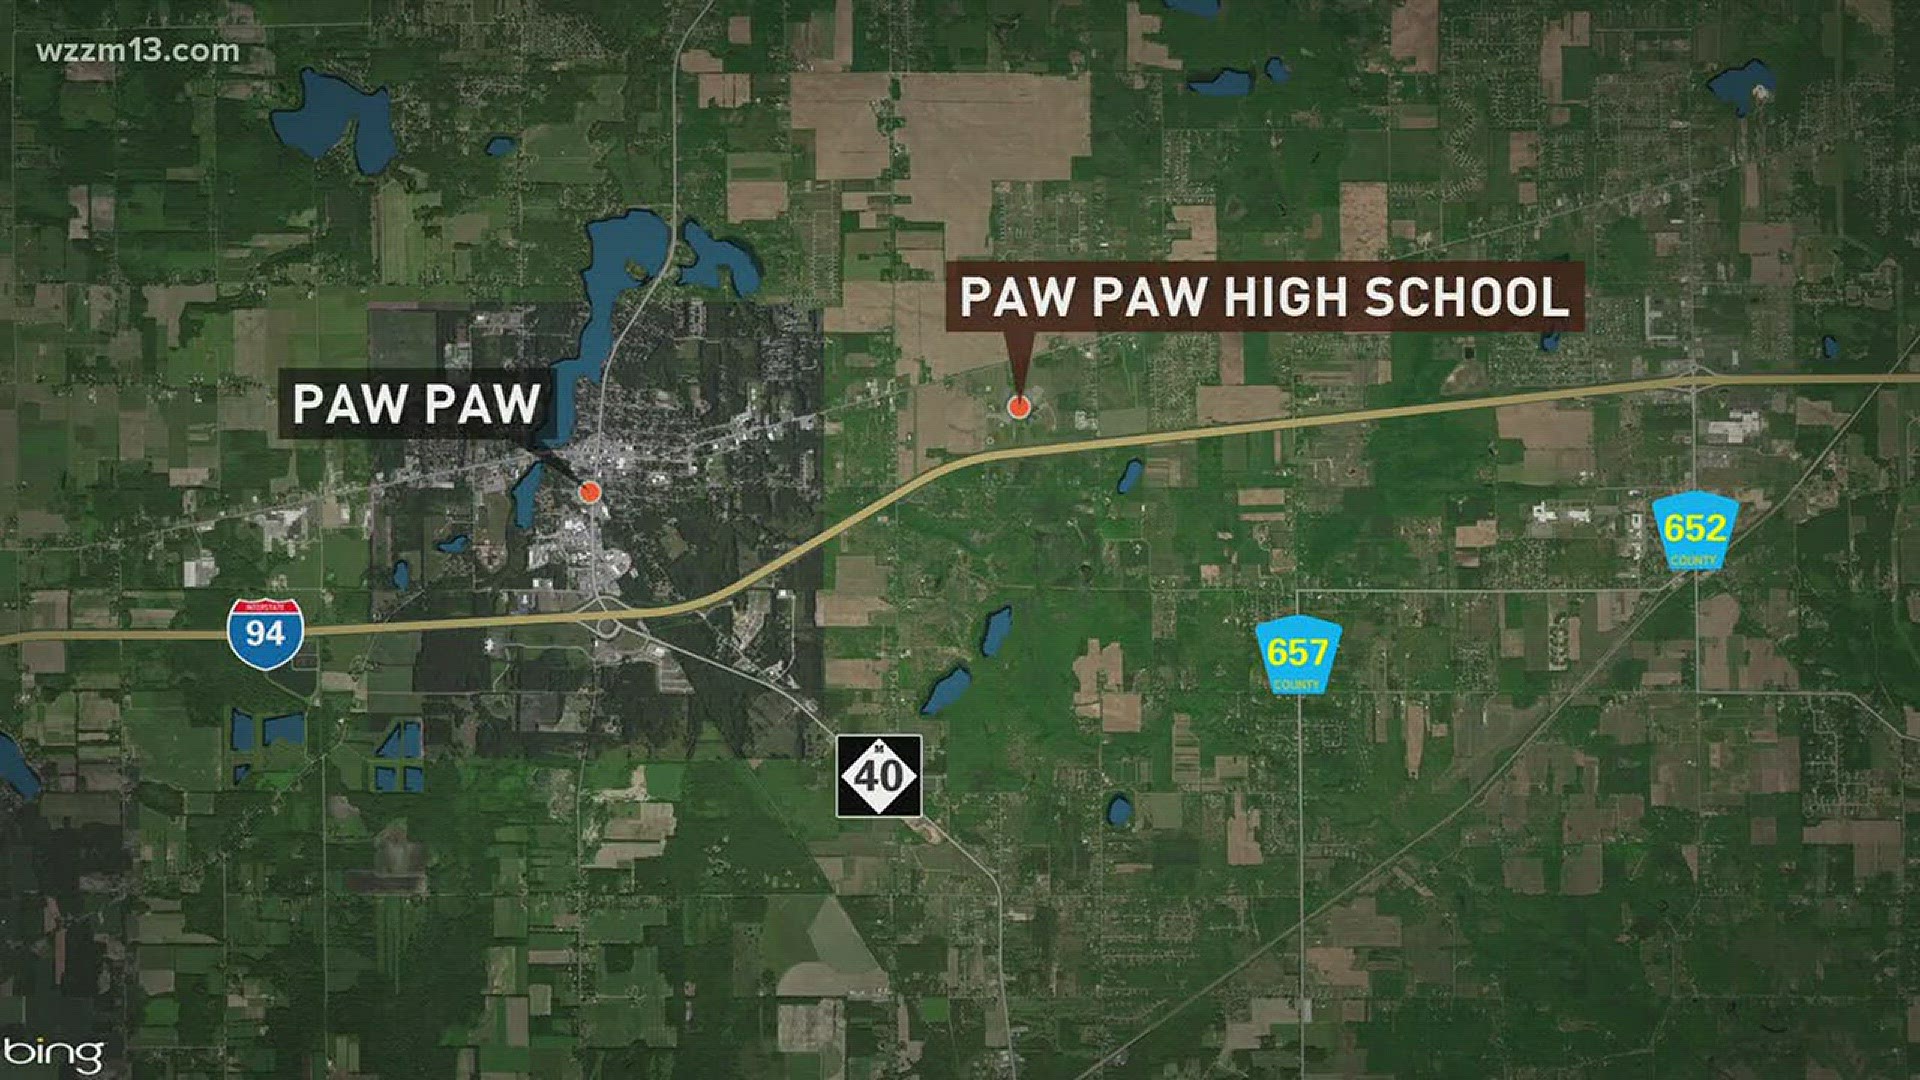 Paw Paw Schools threat thwarted